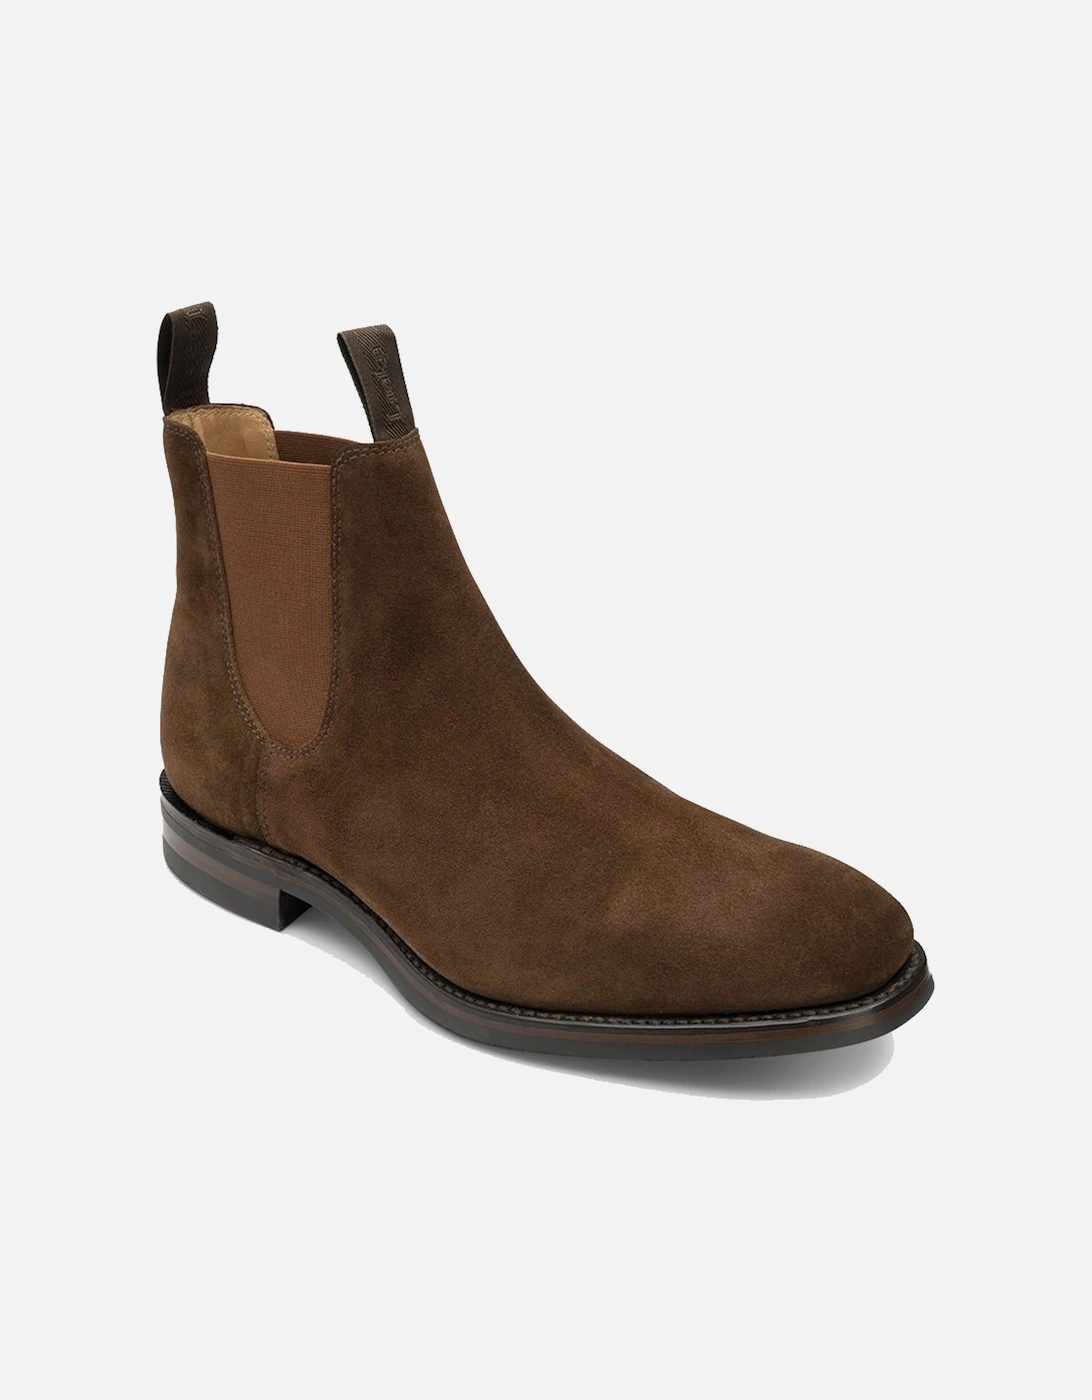 Chatsworth Suede Boot Tobacco